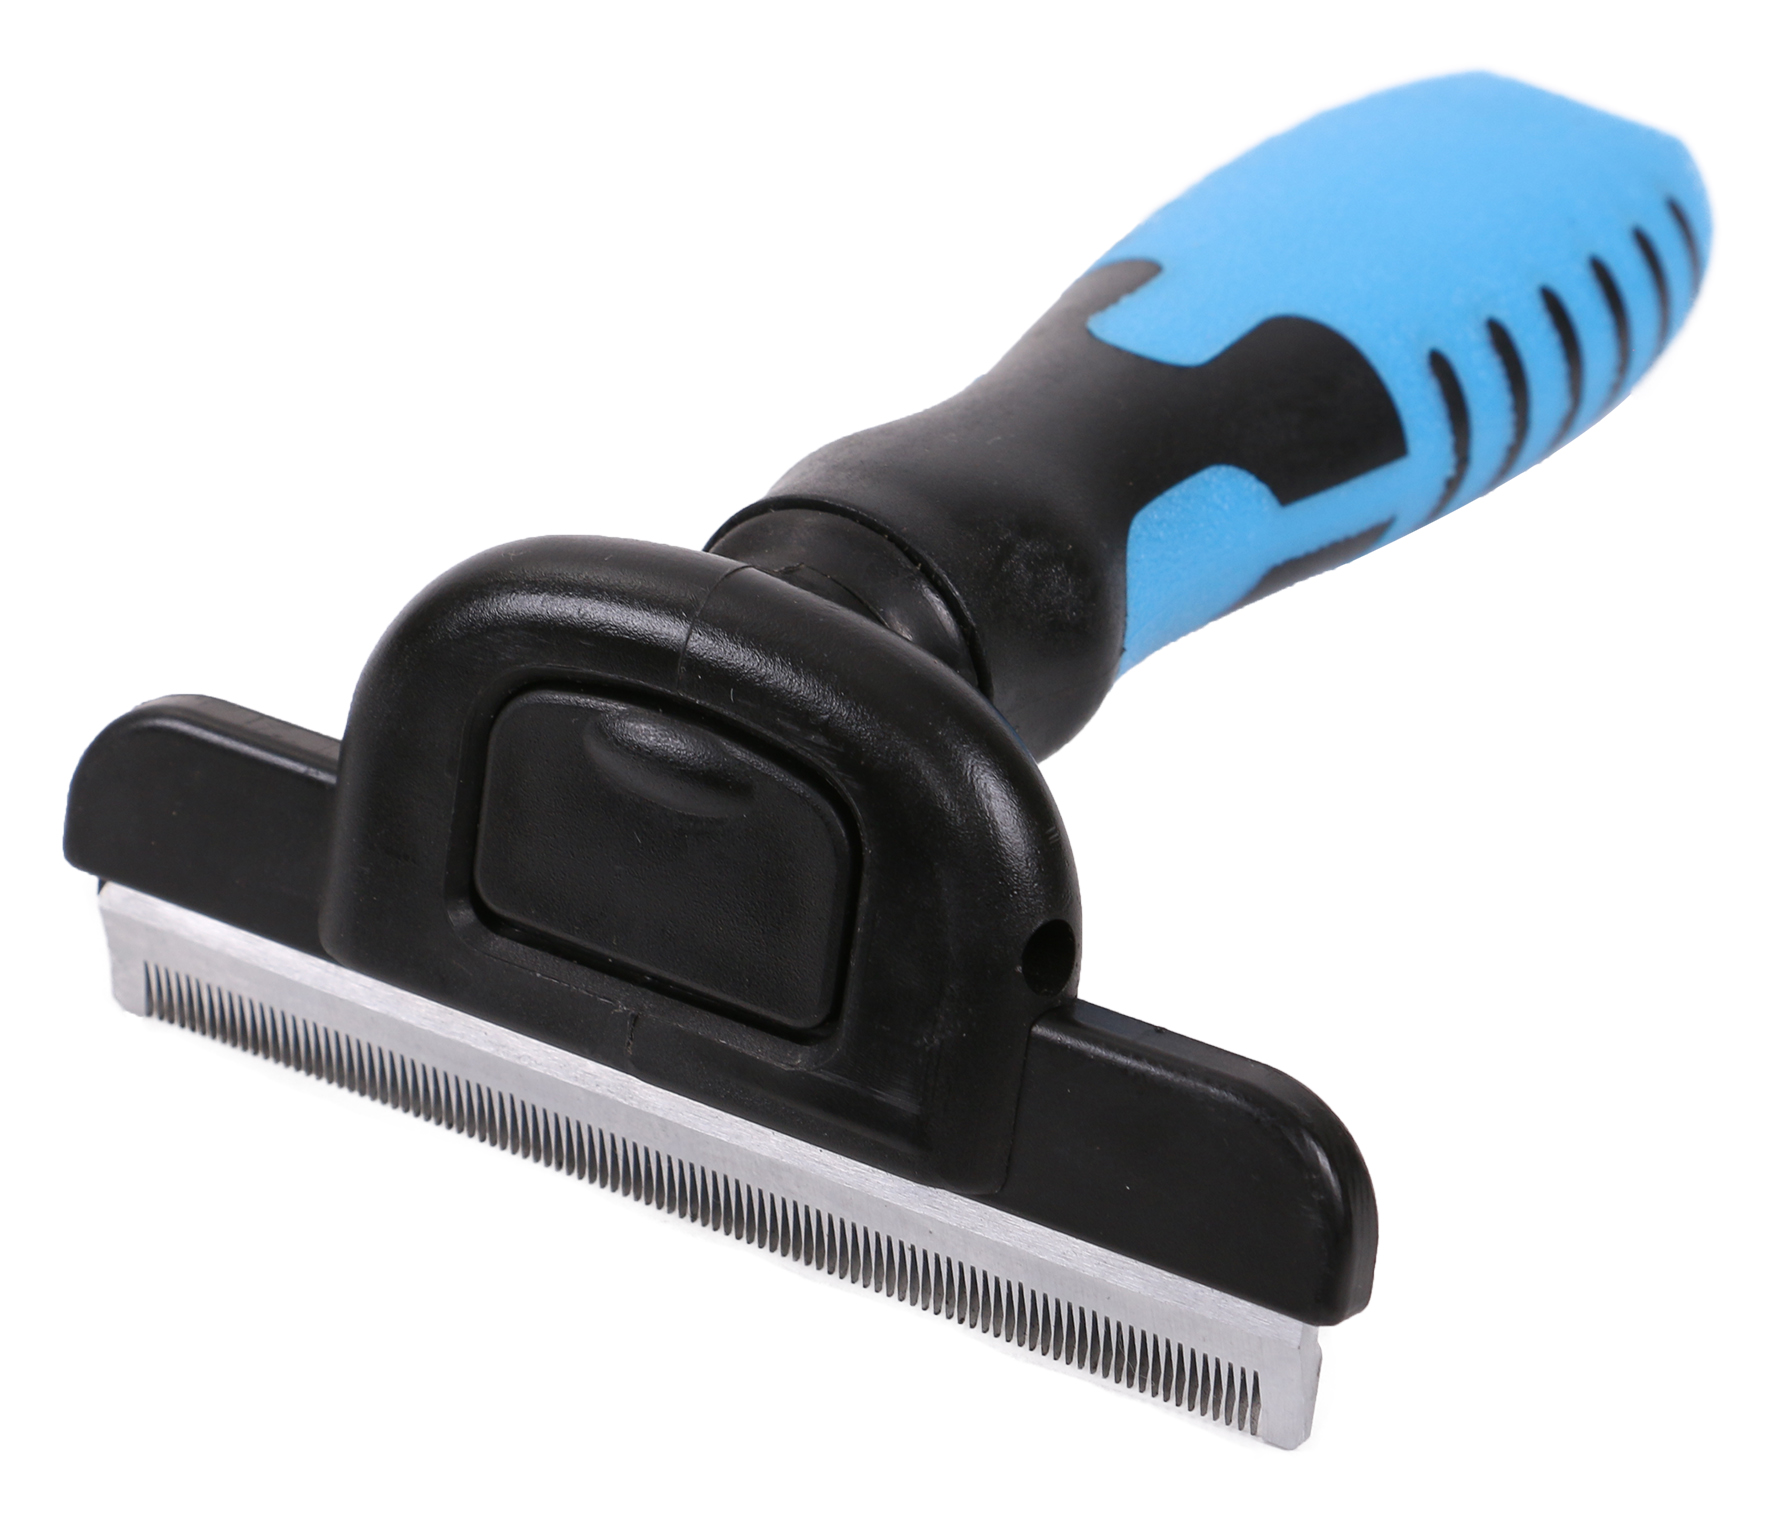 High Quality Pet Hair Remover Brush in Blue Color for Dogs&cats